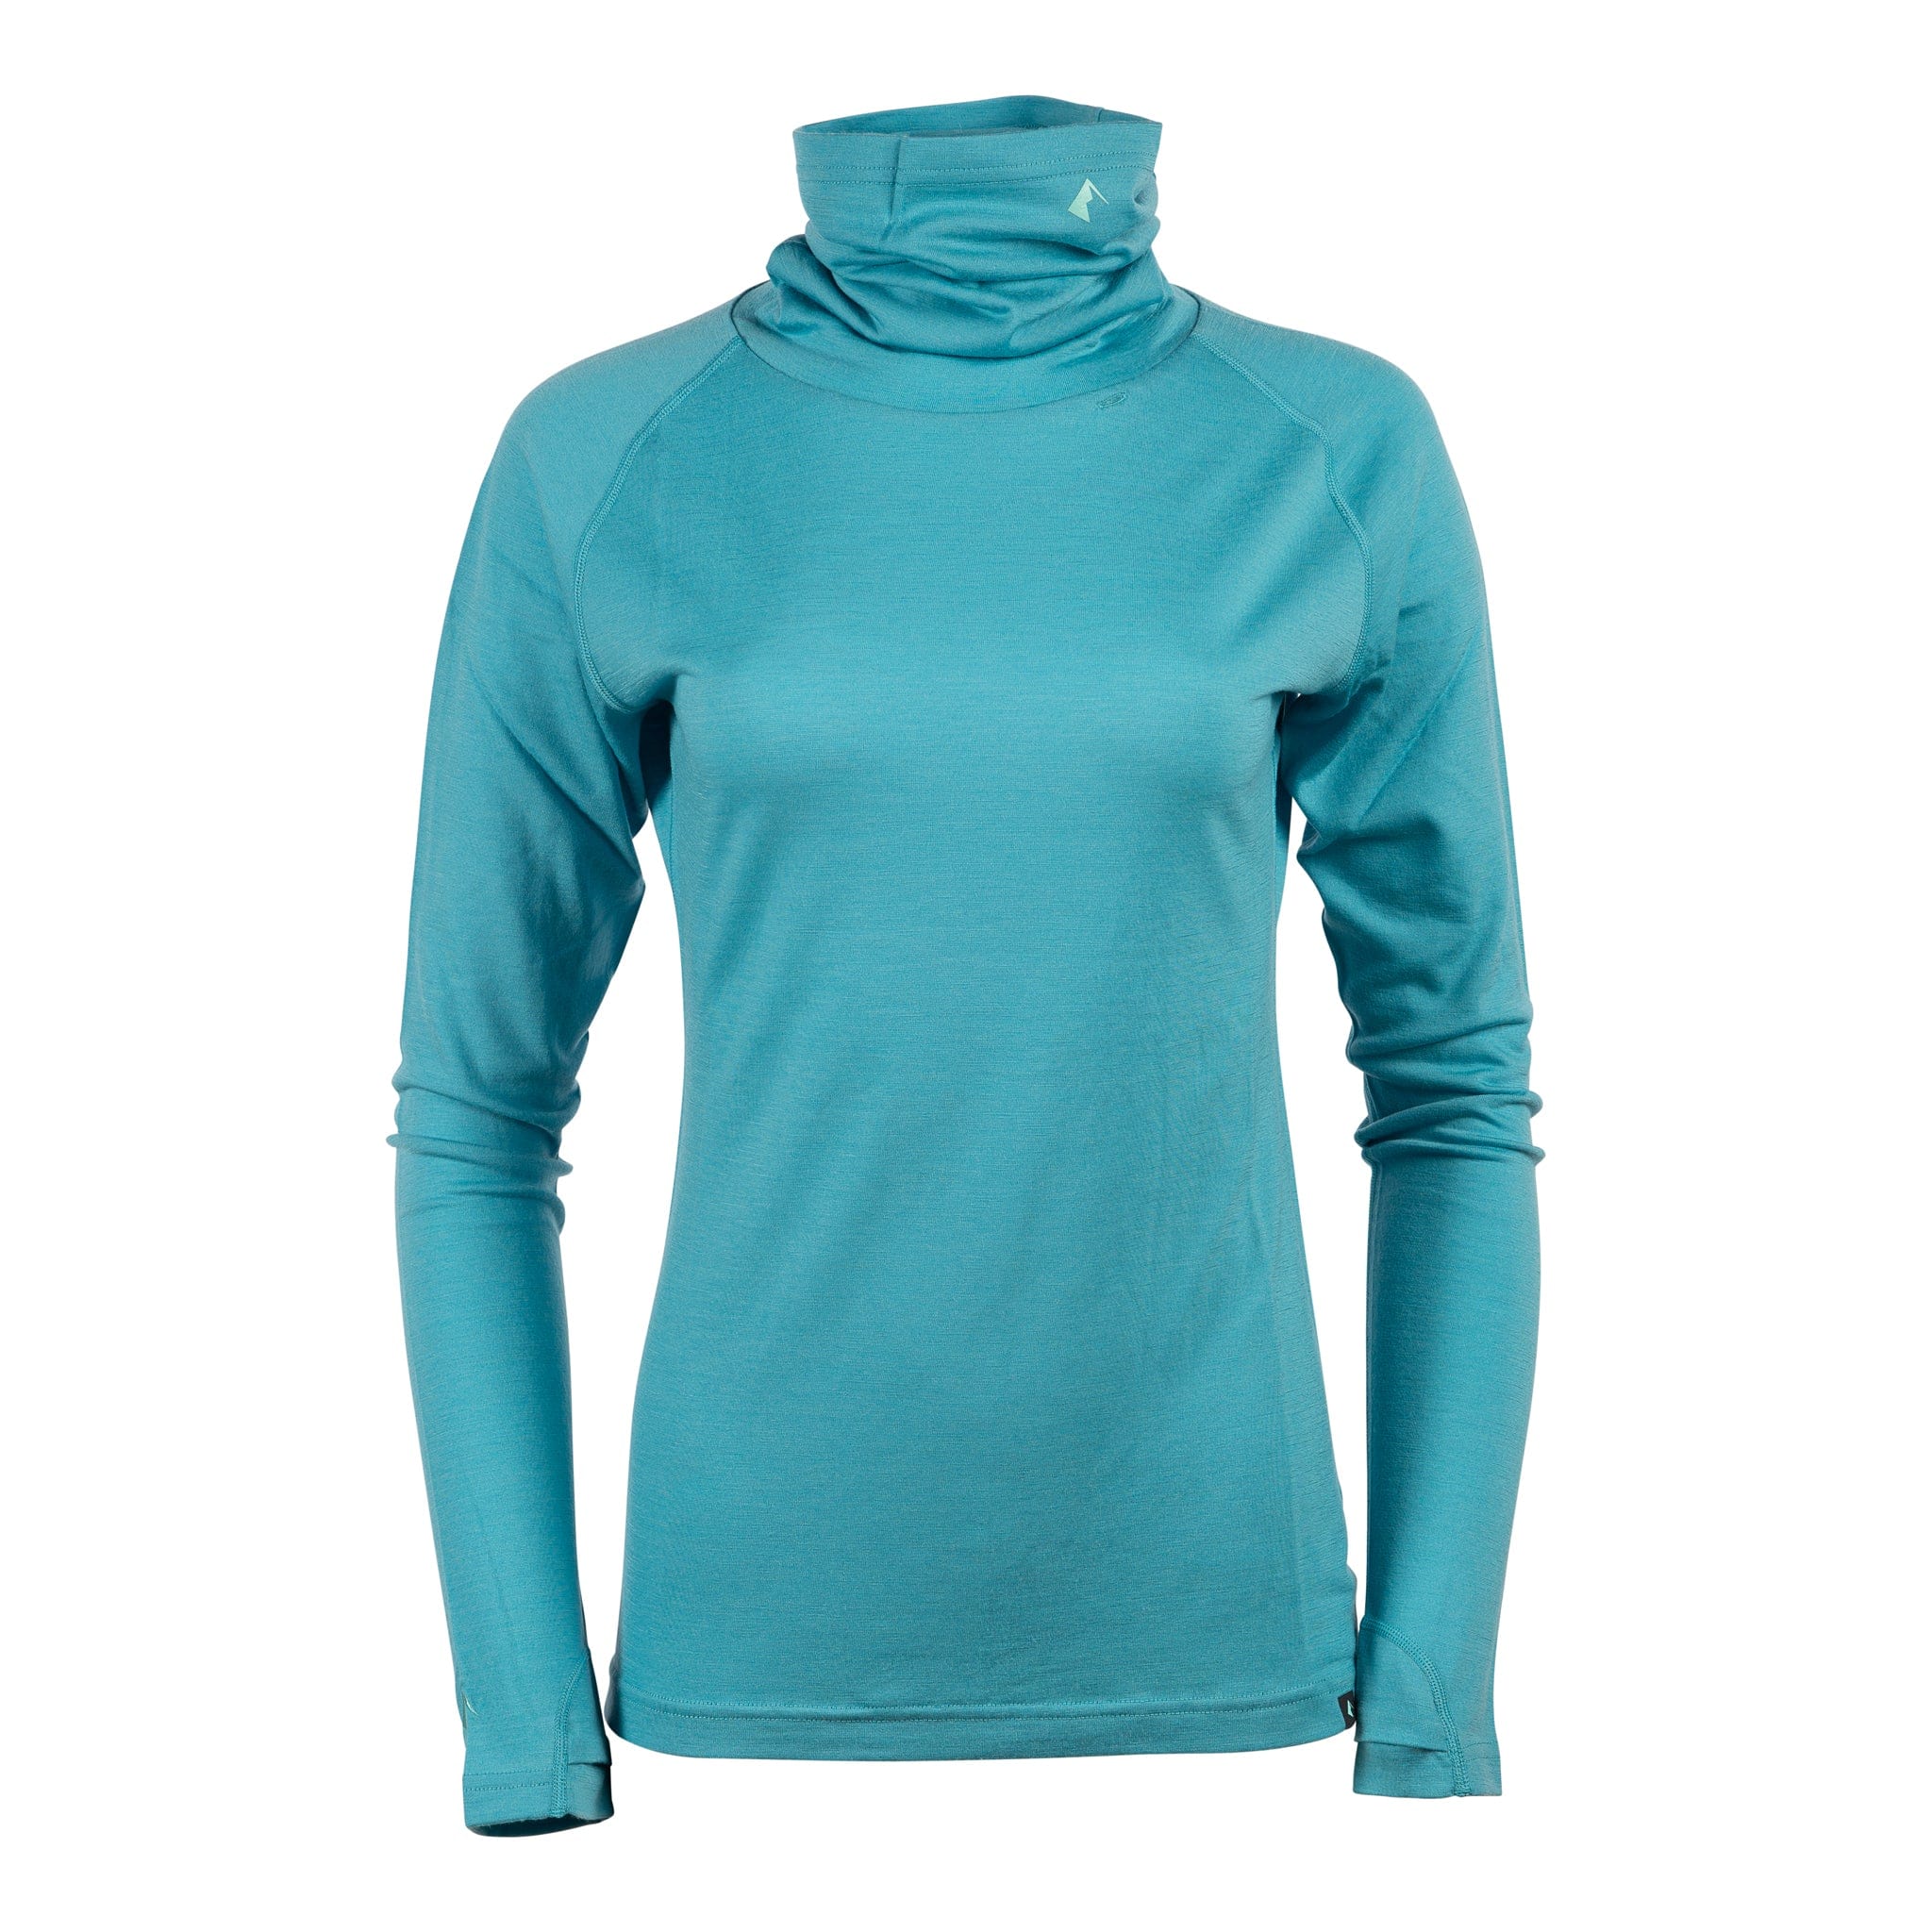 Gear Review: Ridge Merino Camisole, Aspect and Heist Base Layer